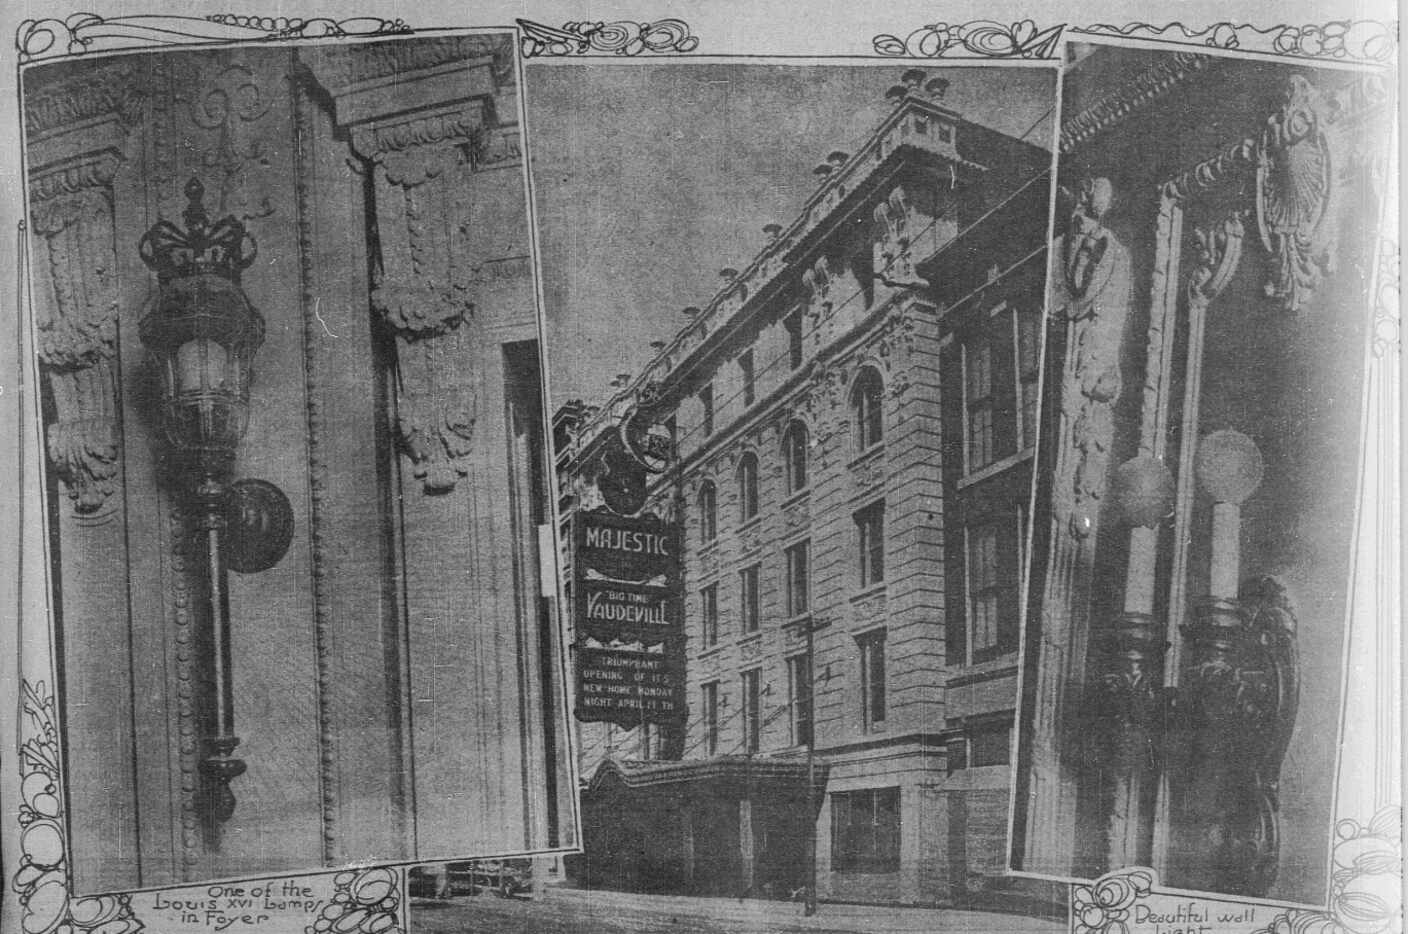 The new Majestic building on Elm Street in 1921.